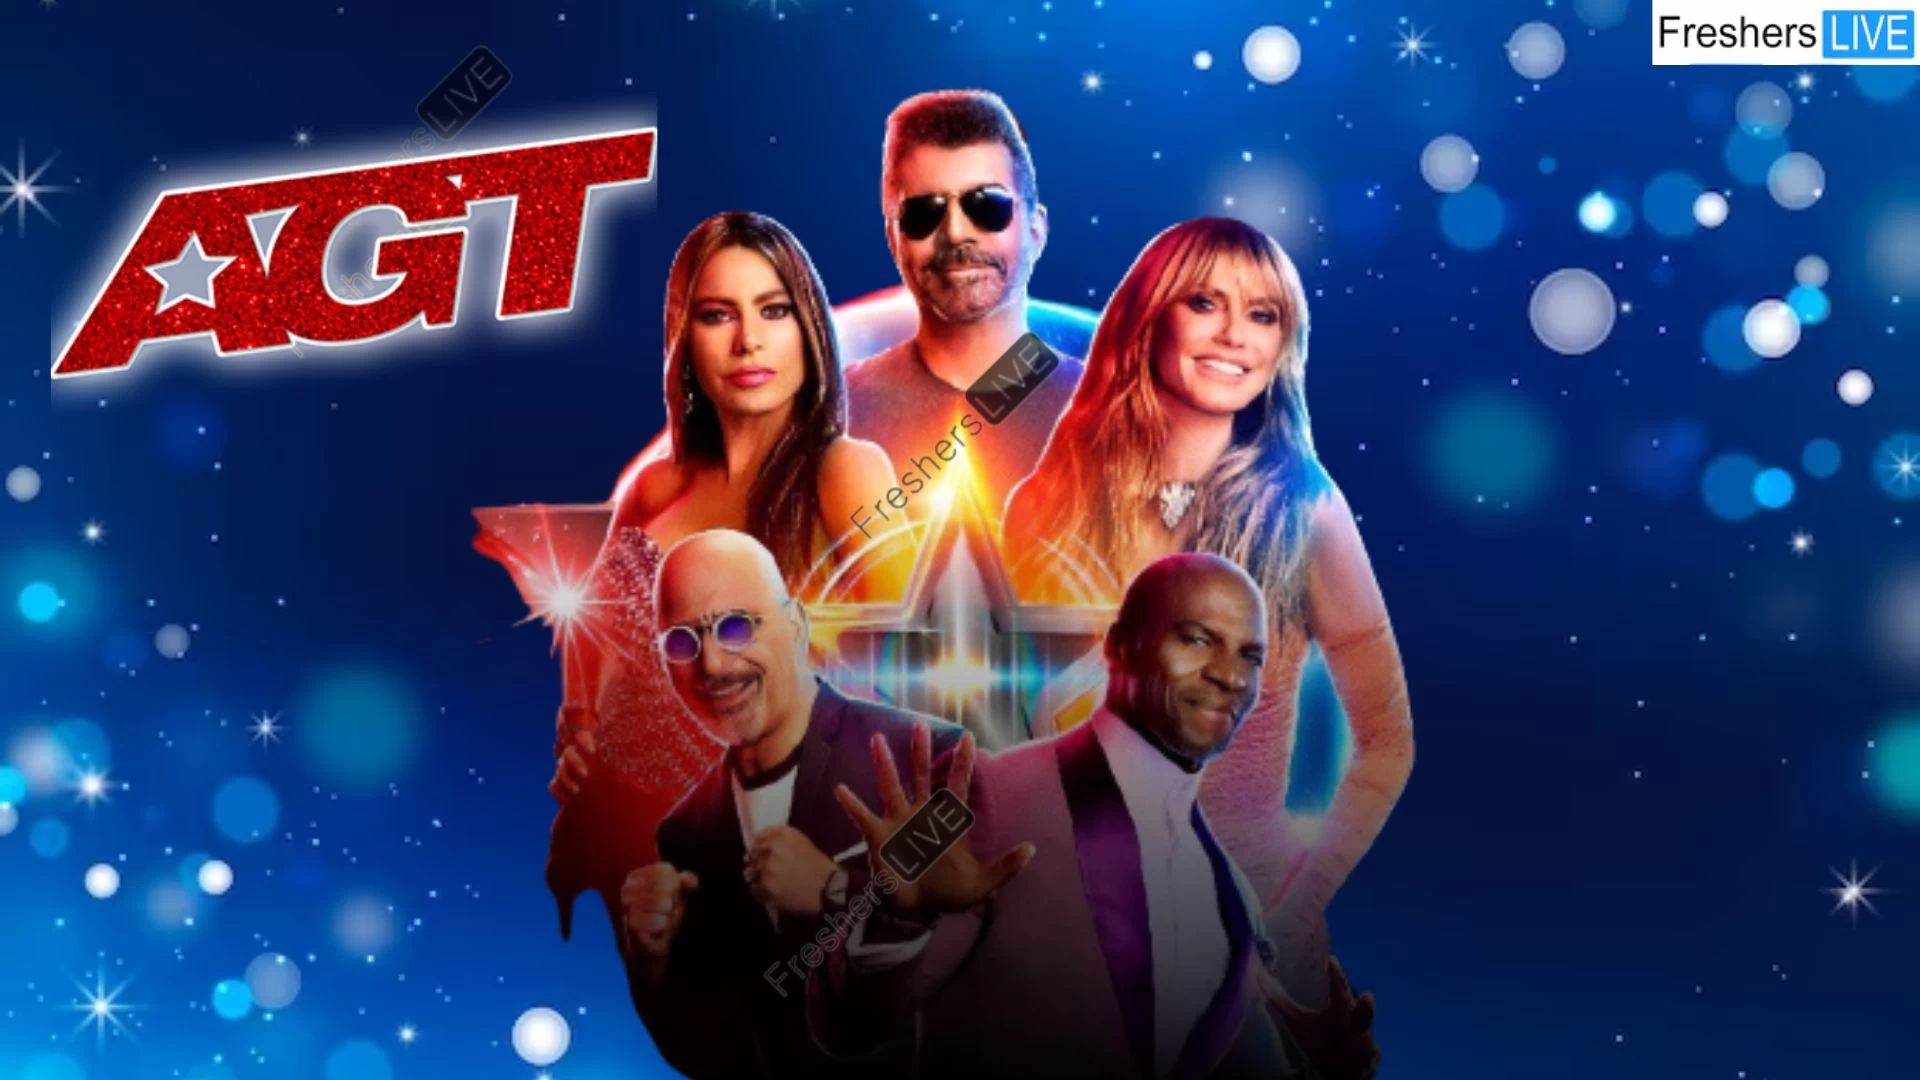 America's Got Talent Season 18 Finalists: Who Made it to the Finals?